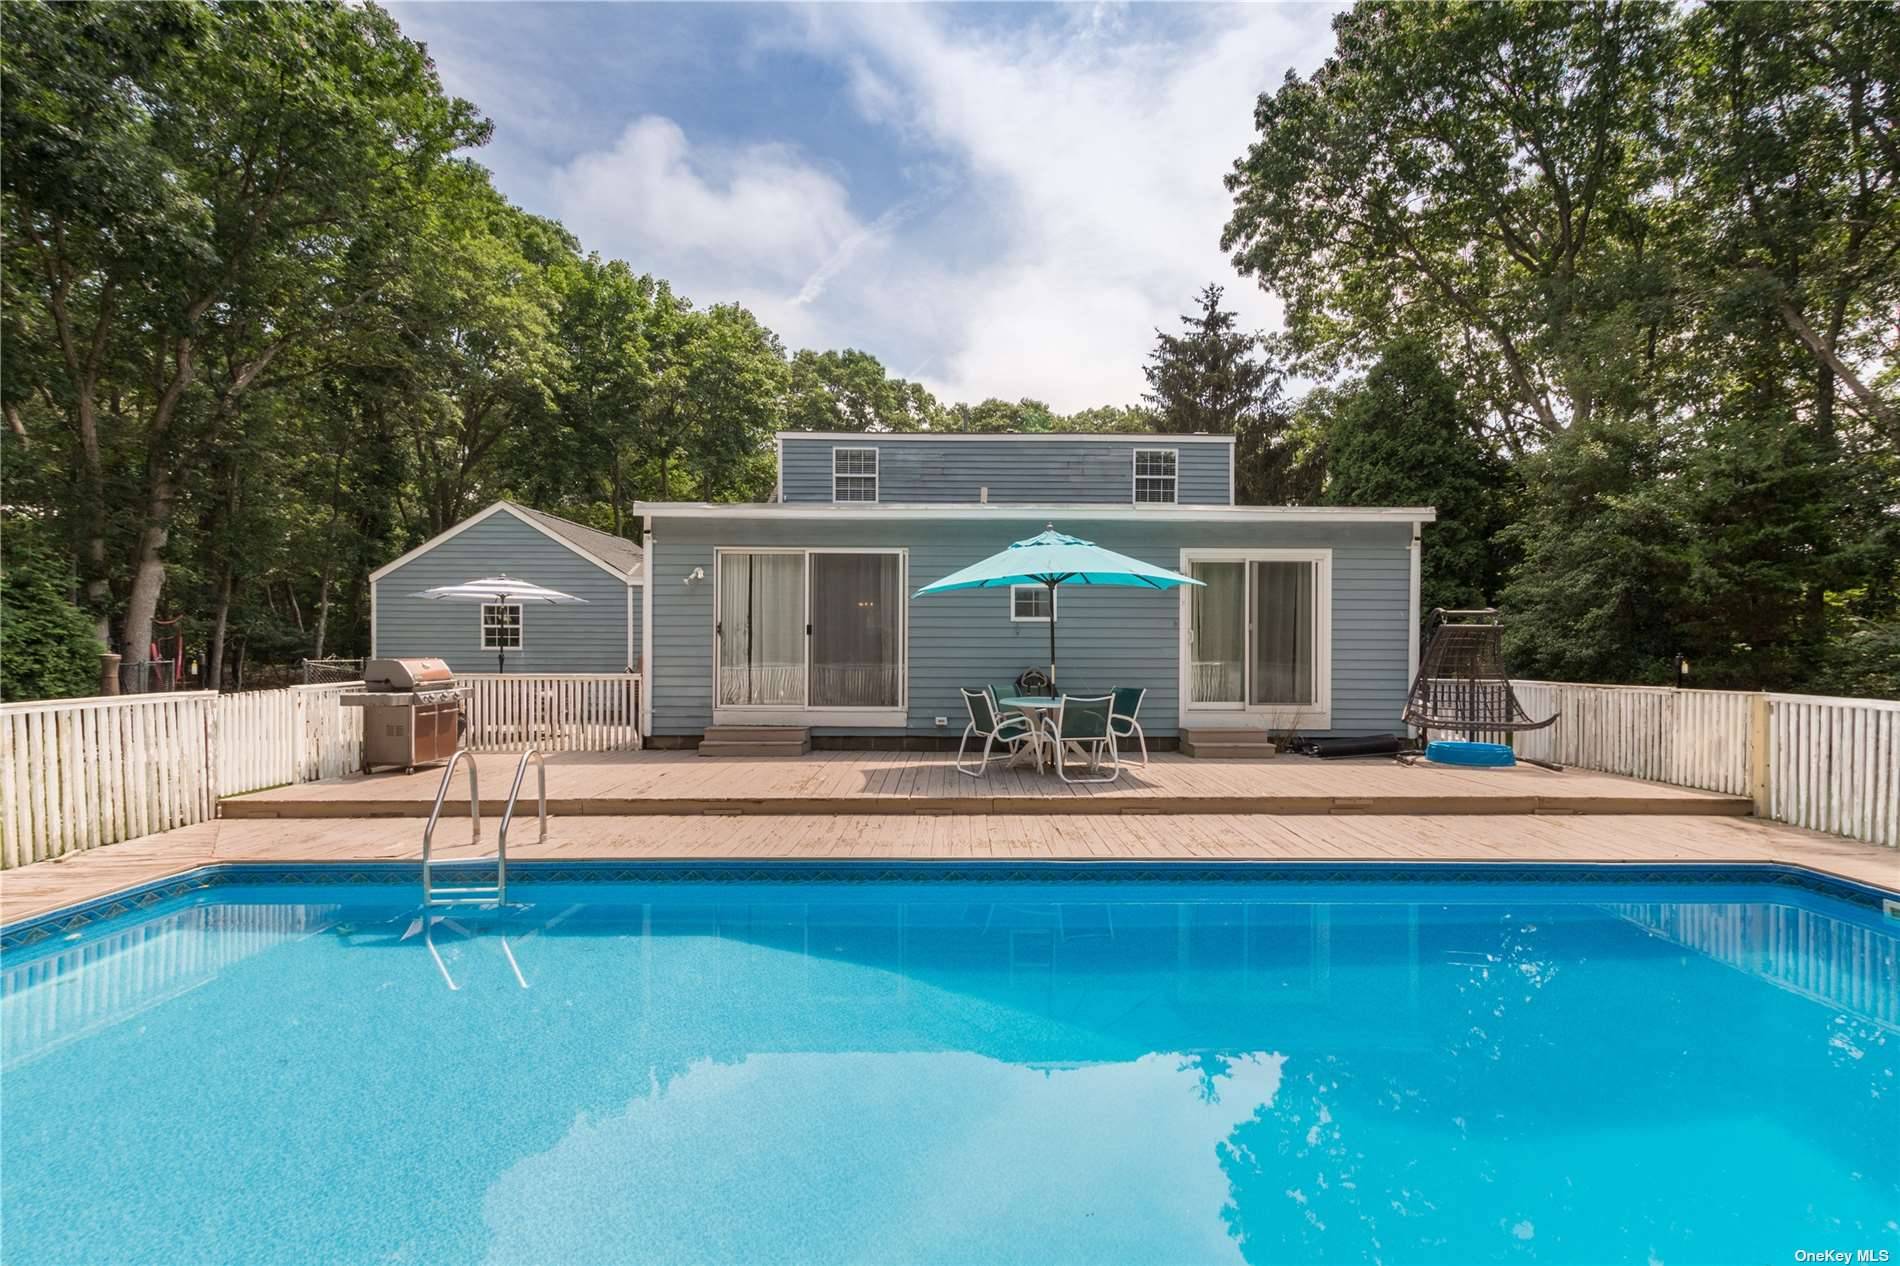 Don't miss this Charming Westhampton Rental recently updated with in ground swimming pool, oversized deck and blue stone patio with Chiminea.